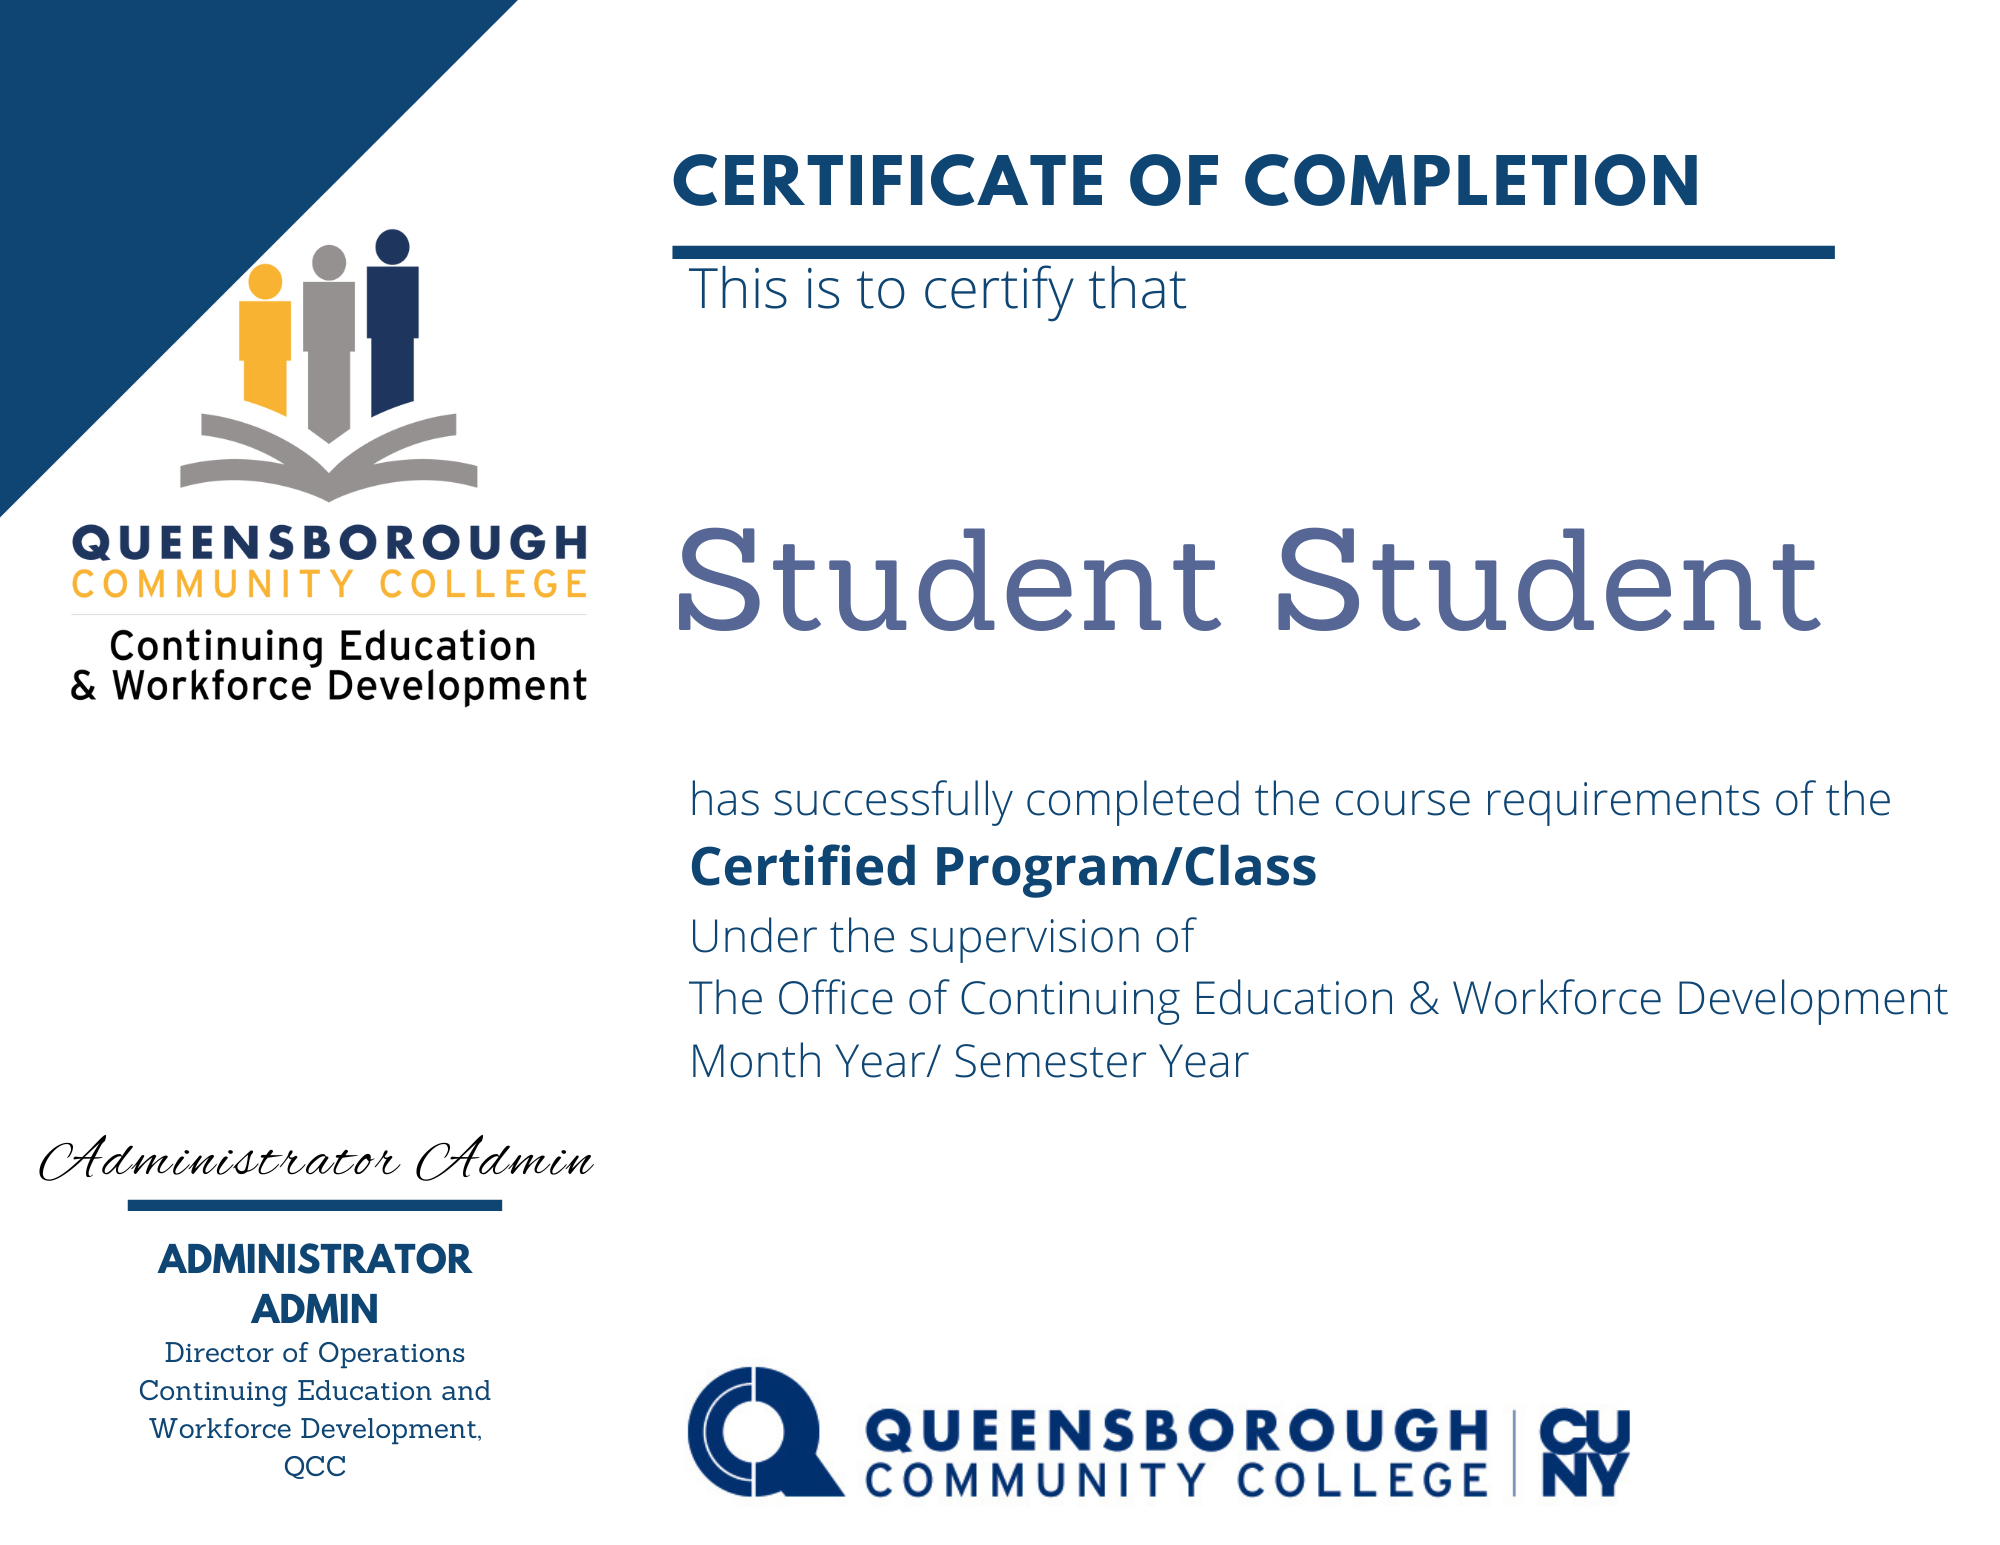 Depicition of a credential earned for completing this course